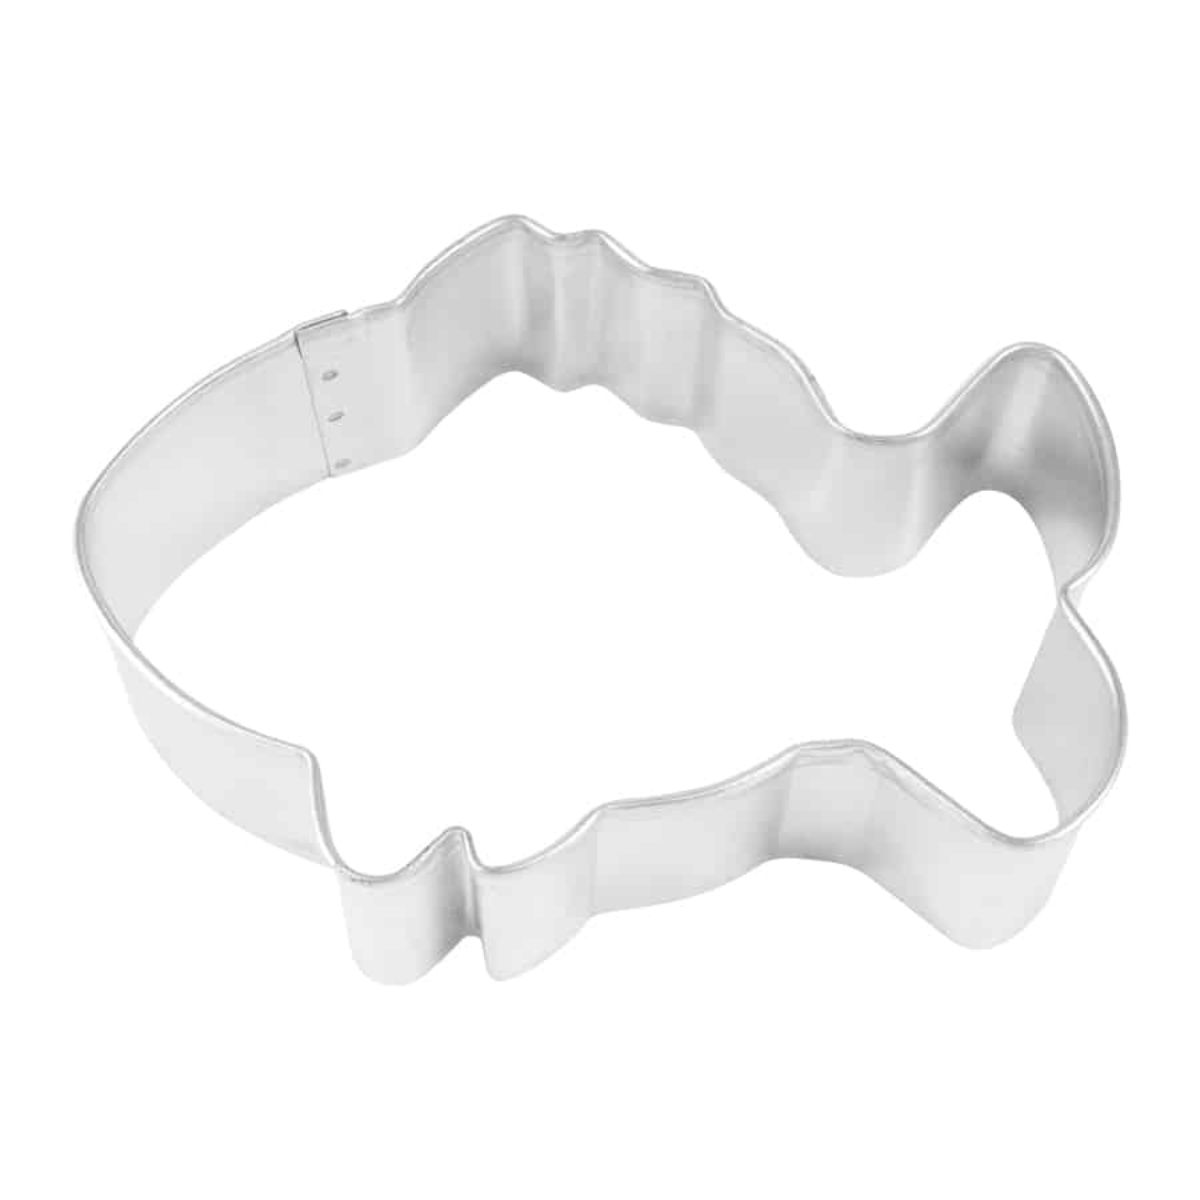 R&M Tropical Fish Cookie Cutter 3.5"